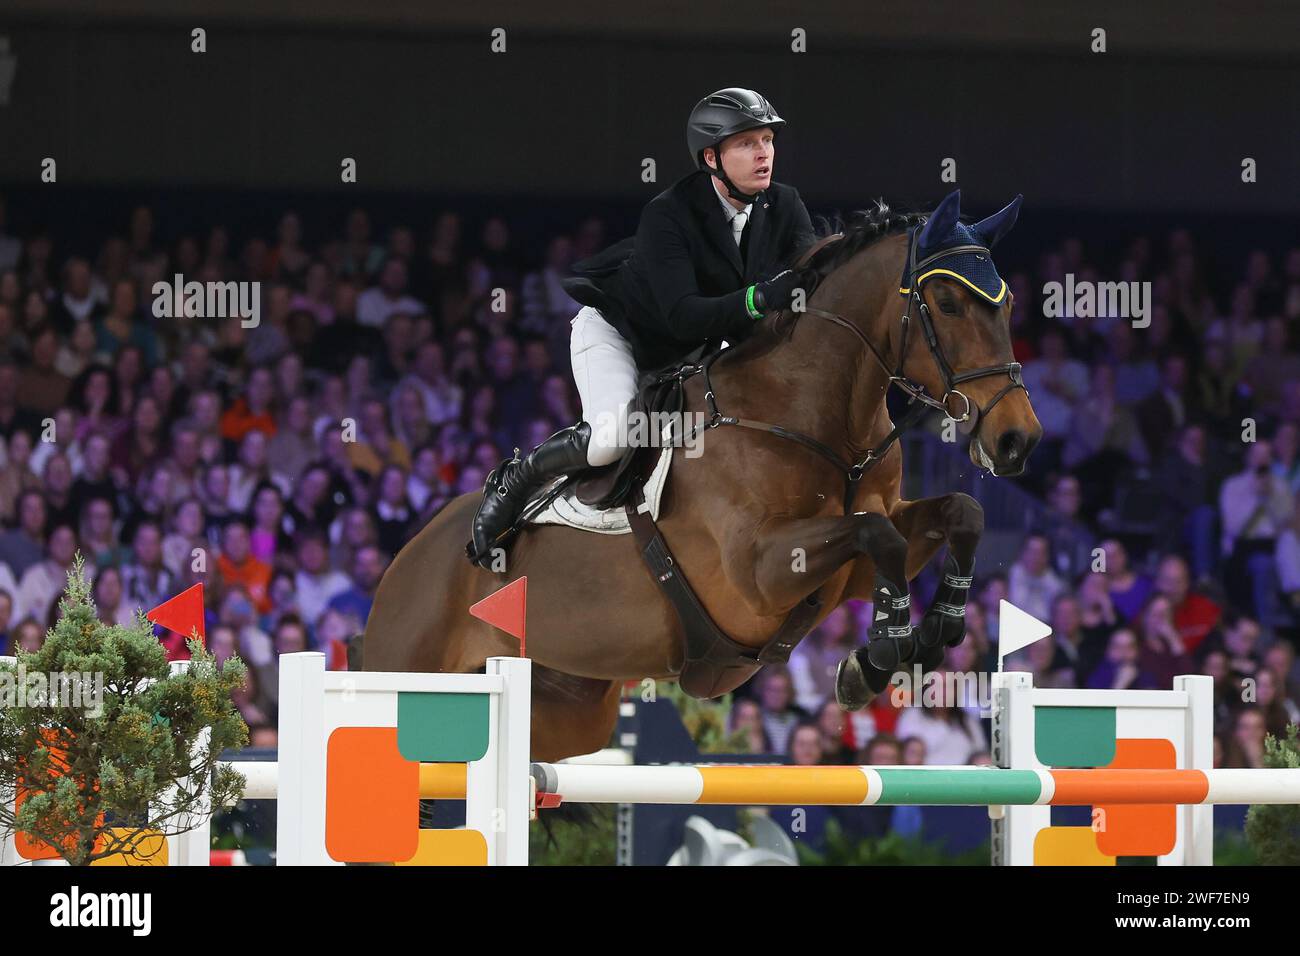 AMSTERDAM, NETHERLANDS - JANUARY 28 : Daniel Coyle (IRL) Legacy winner of Jumping Amsterdam 2024 Longines FEI Jumping World Cup Presented by Europarcs Stock Photo